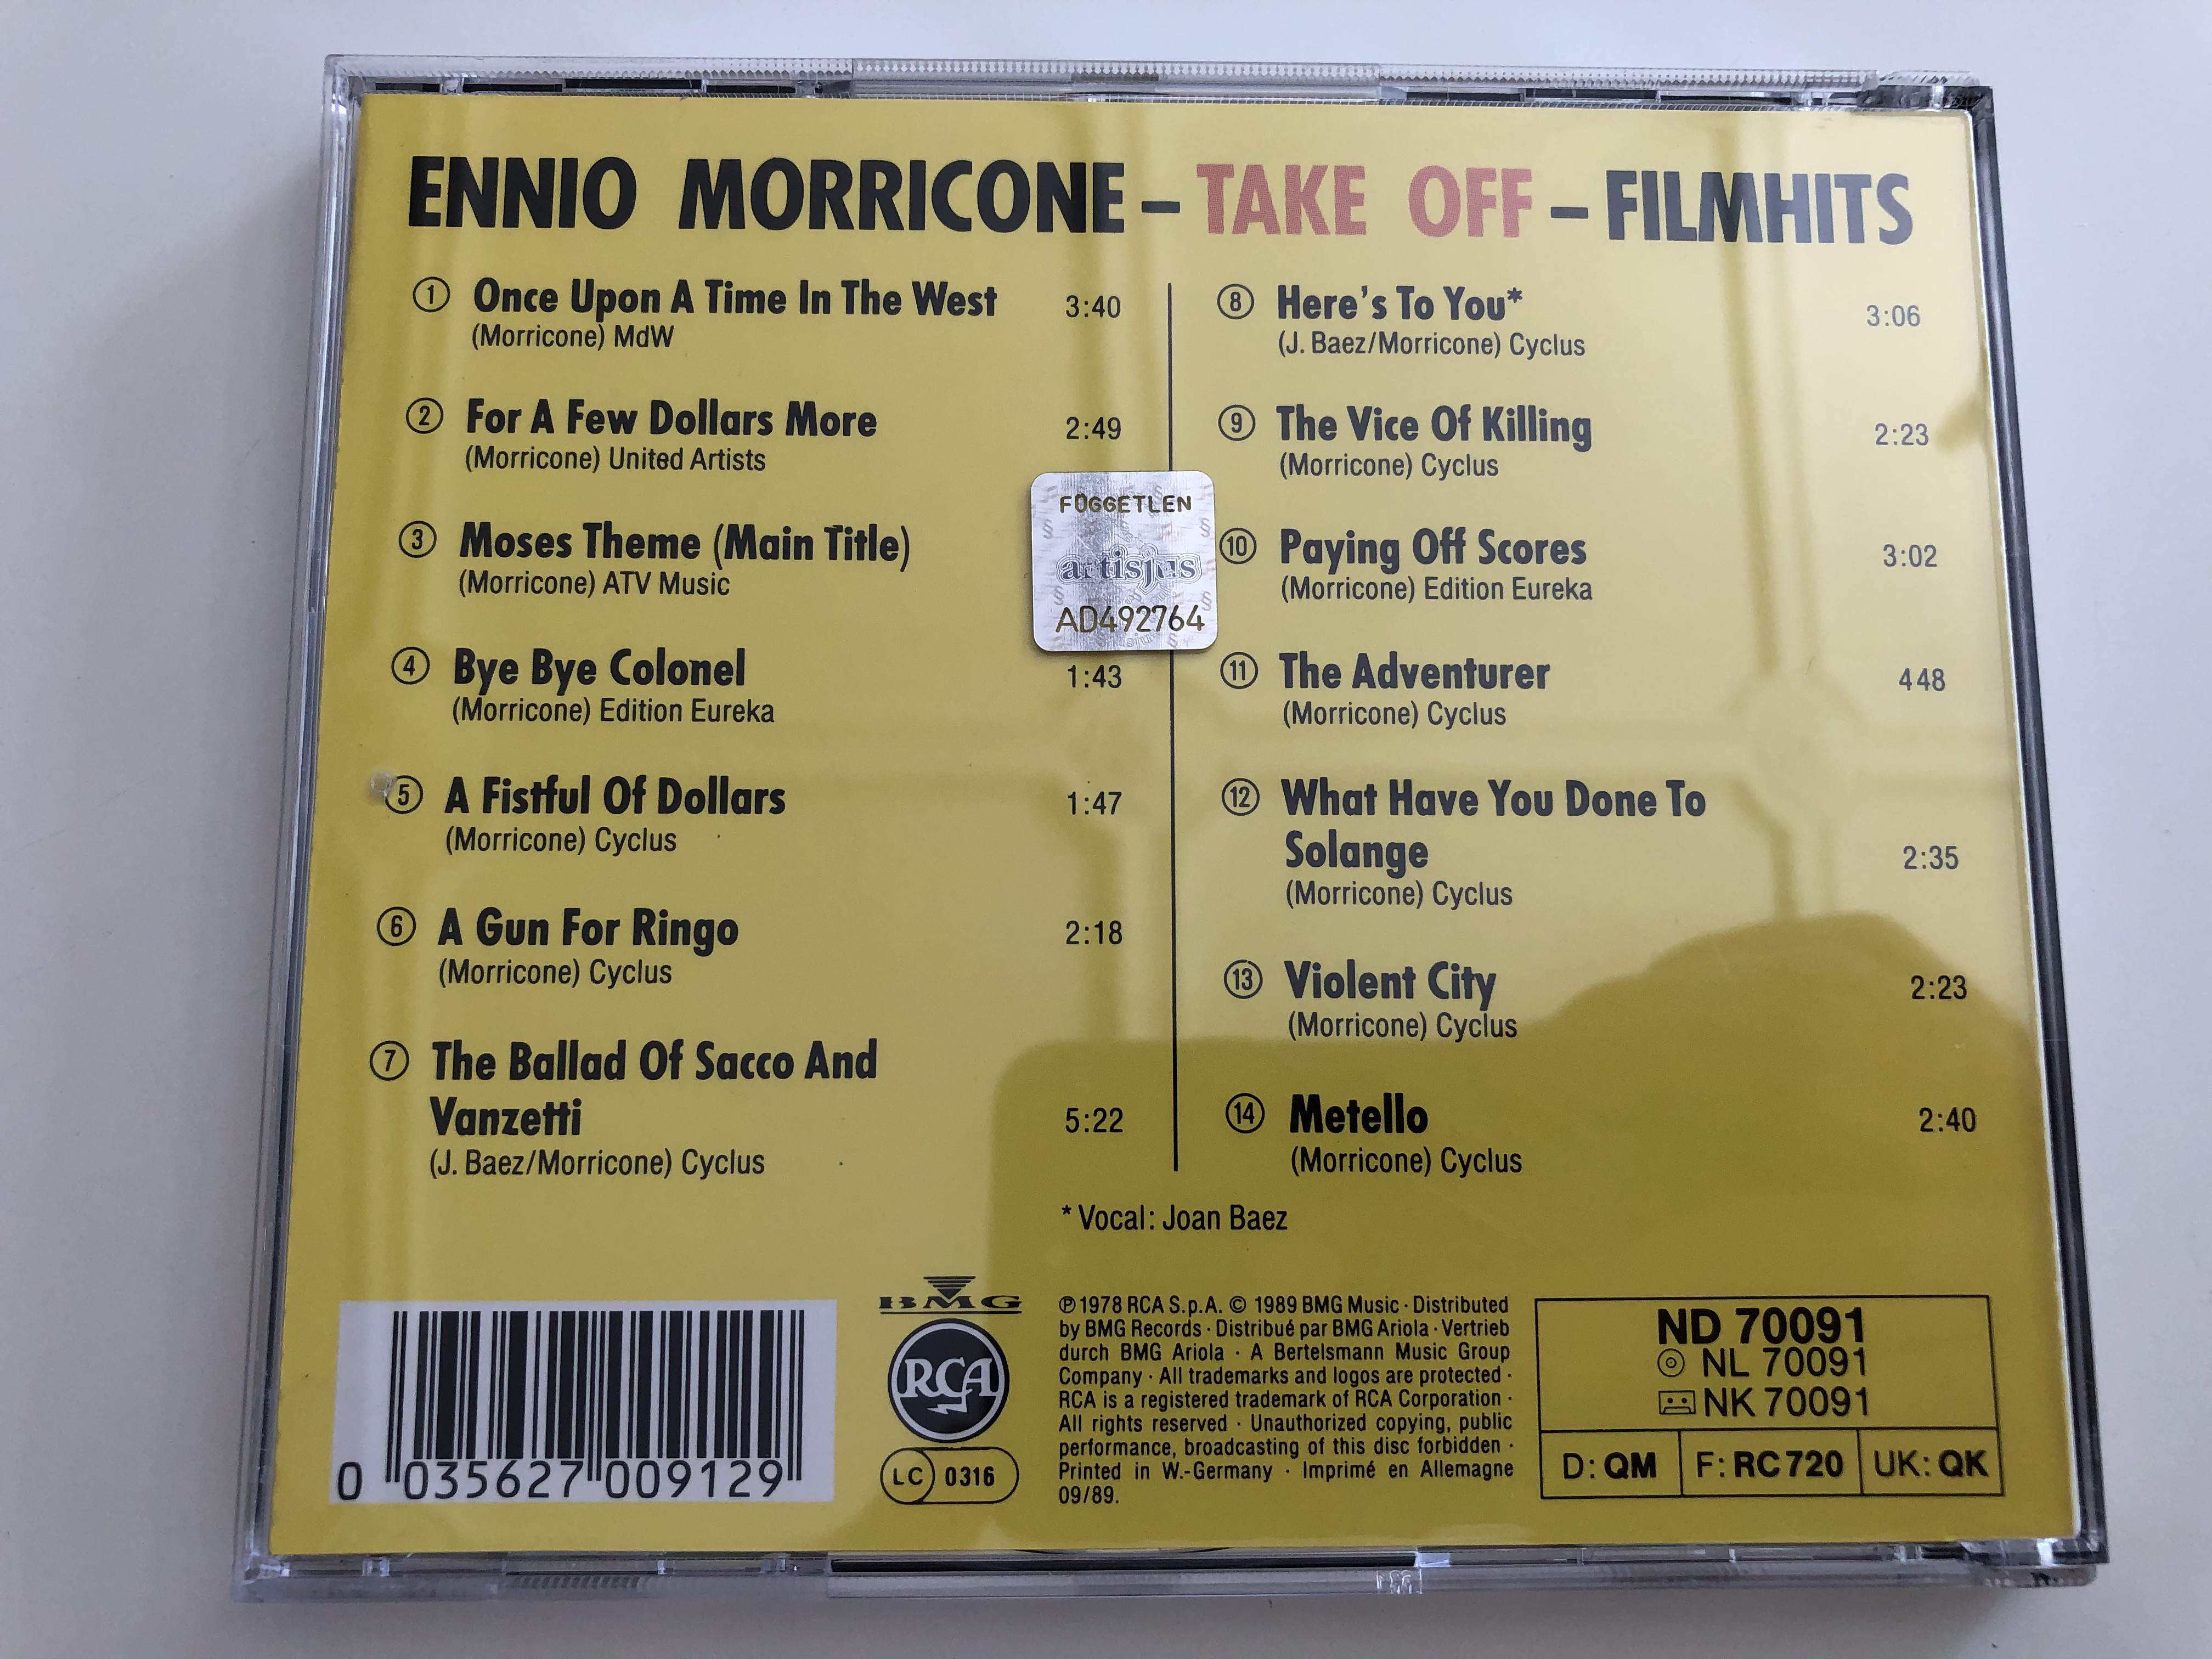 ennio-morricone-film-hits-once-upon-a-time-in-the-west-for-a-few-dollars-more-moses-theme-the-ballad-of-sacco-and-vanzetti-audio-cd-1989-bmg-nd-70091-4-.jpg